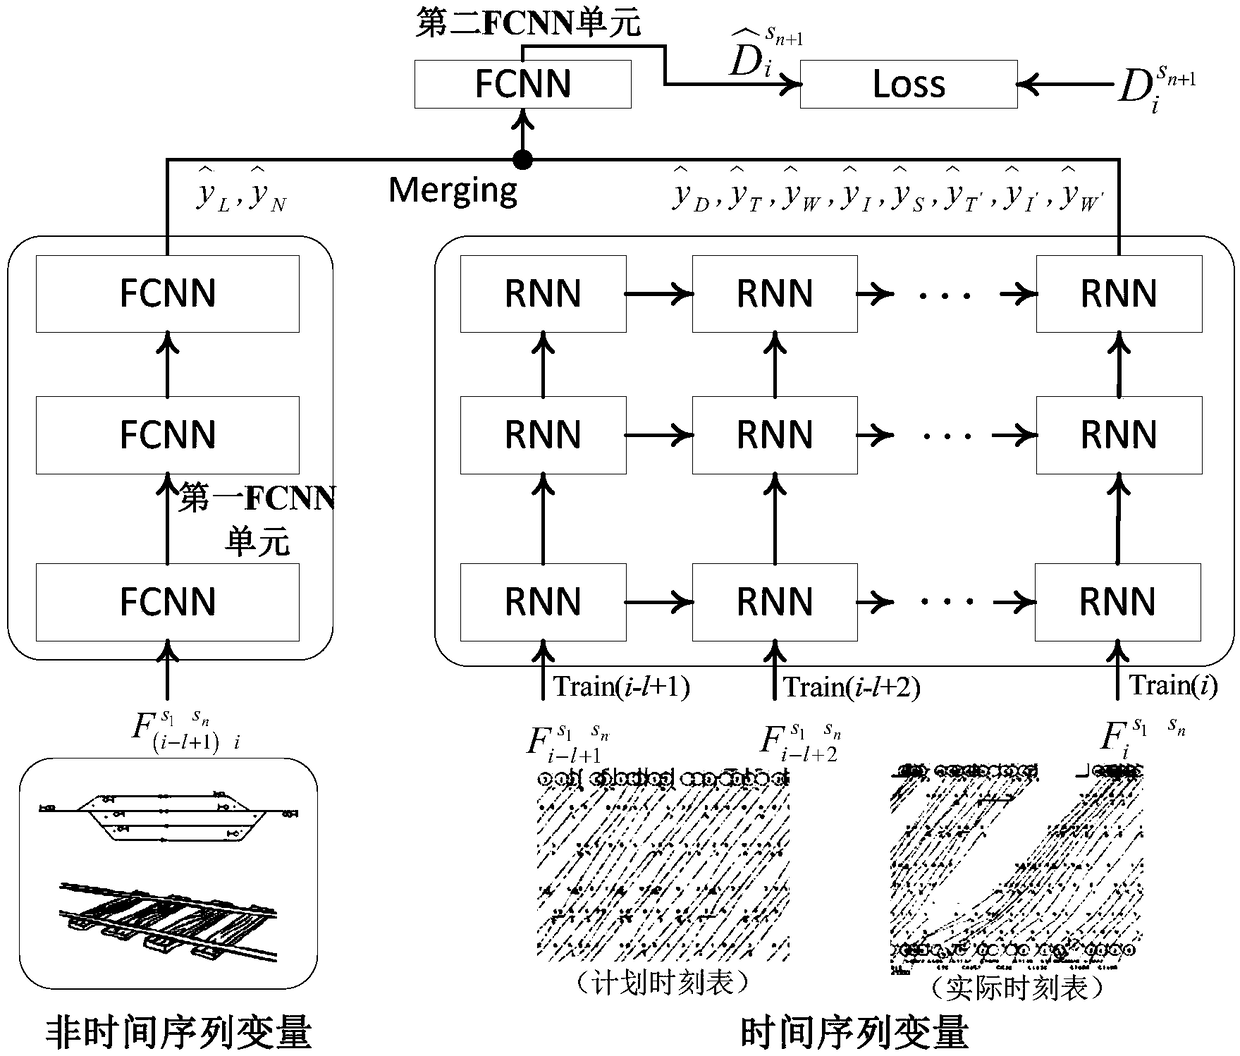 Deep Neural Network Modeling Method for Train Delay Forecasting of High Speed Railway